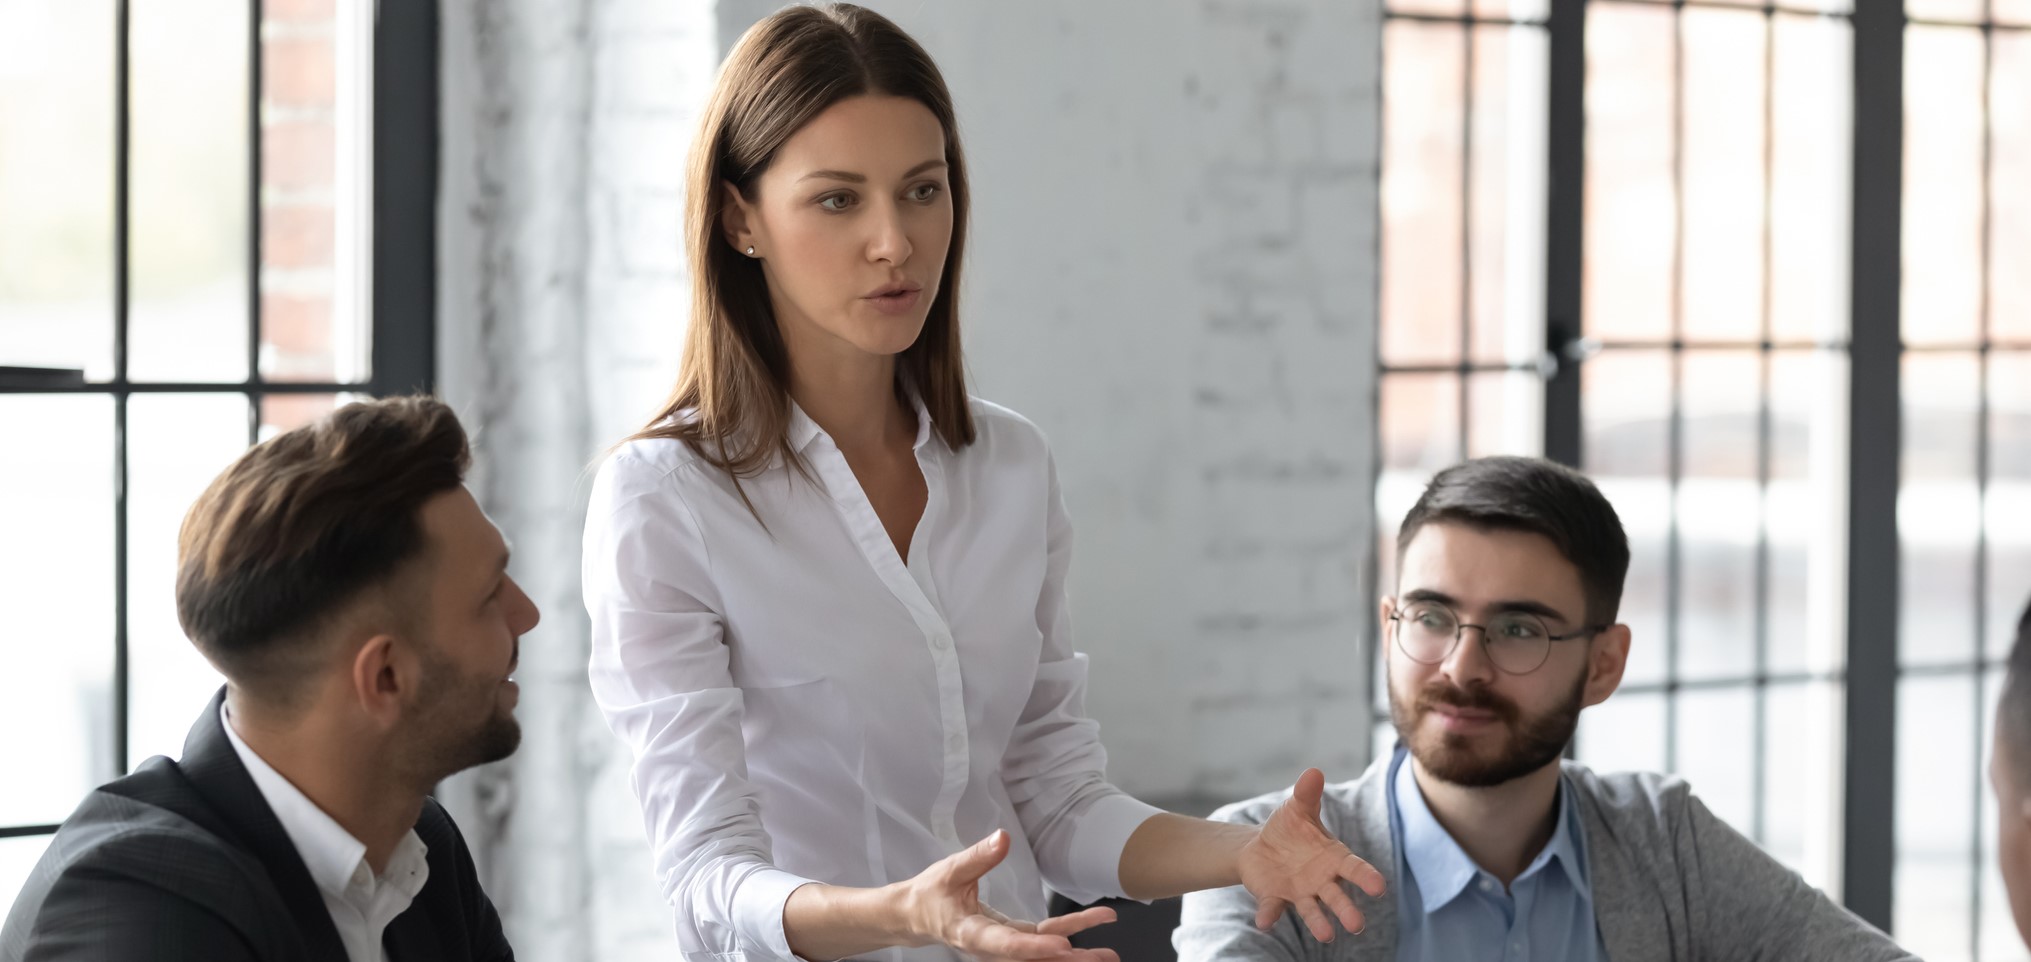 Image of a business woman speaking to two business men in a meeting 